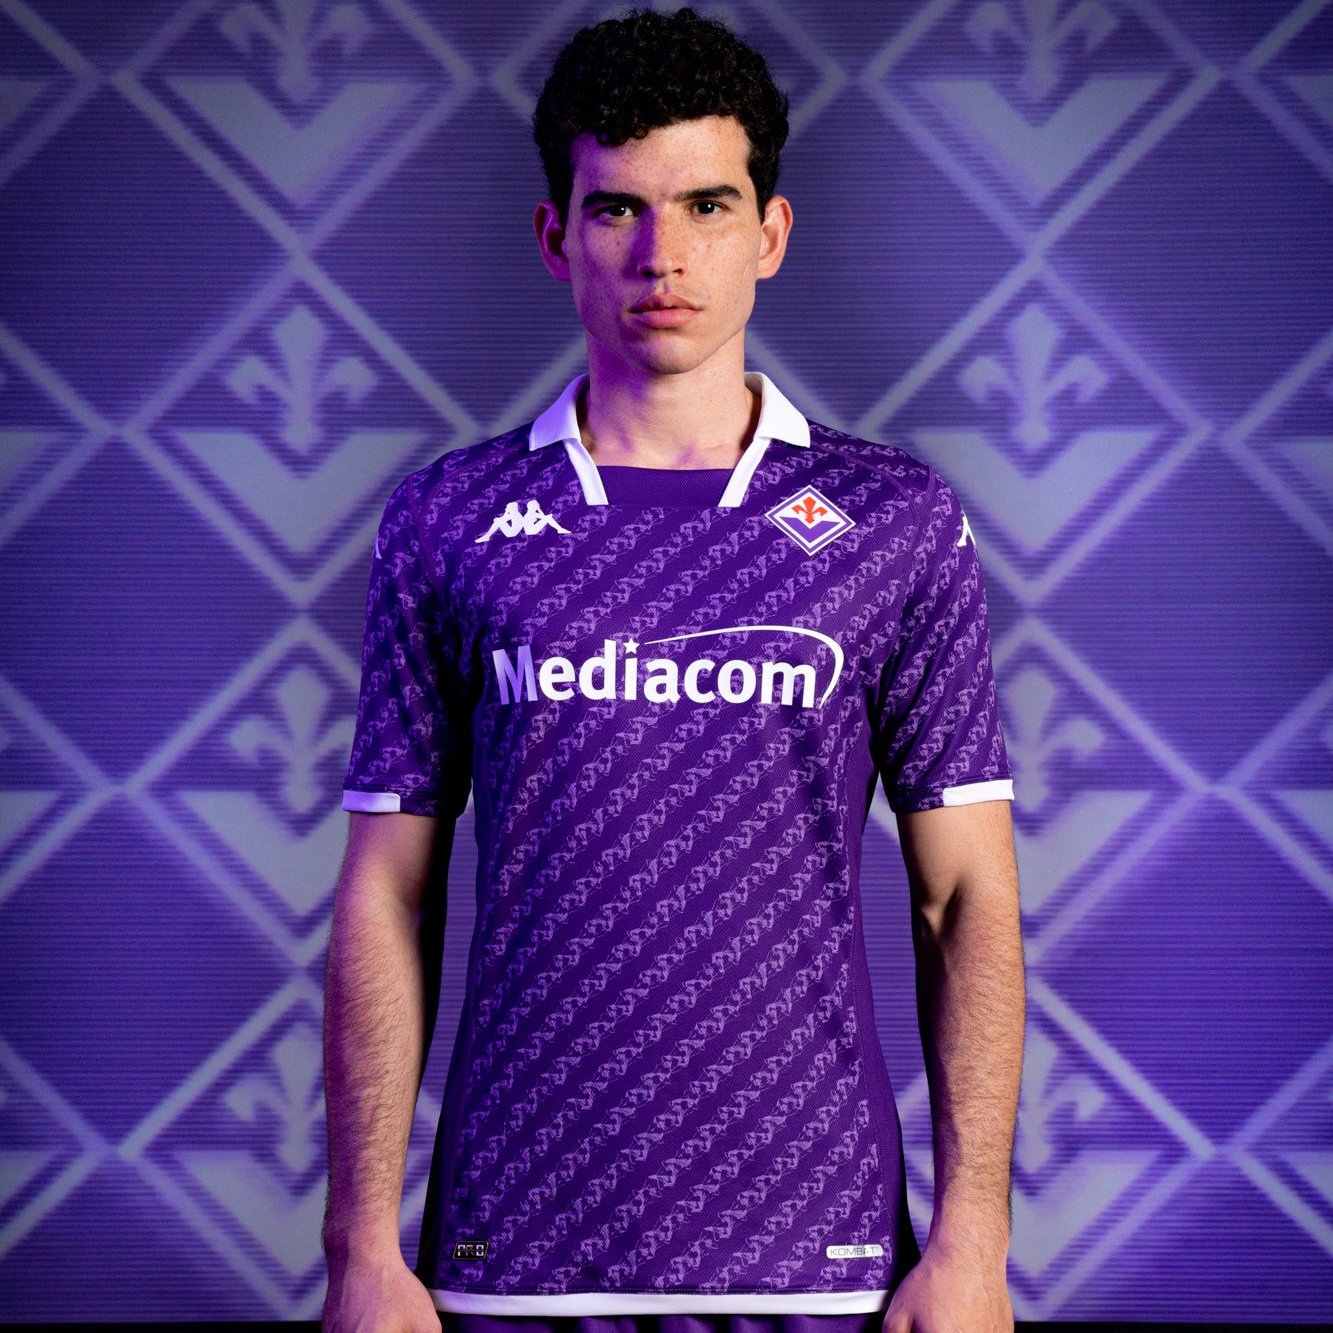 Vintage Football Shirts on Twitter: "Fiorentina have unveiled their new home kit by Kappa What do 💜 https://t.co/gfpj1a3fqF" / Twitter